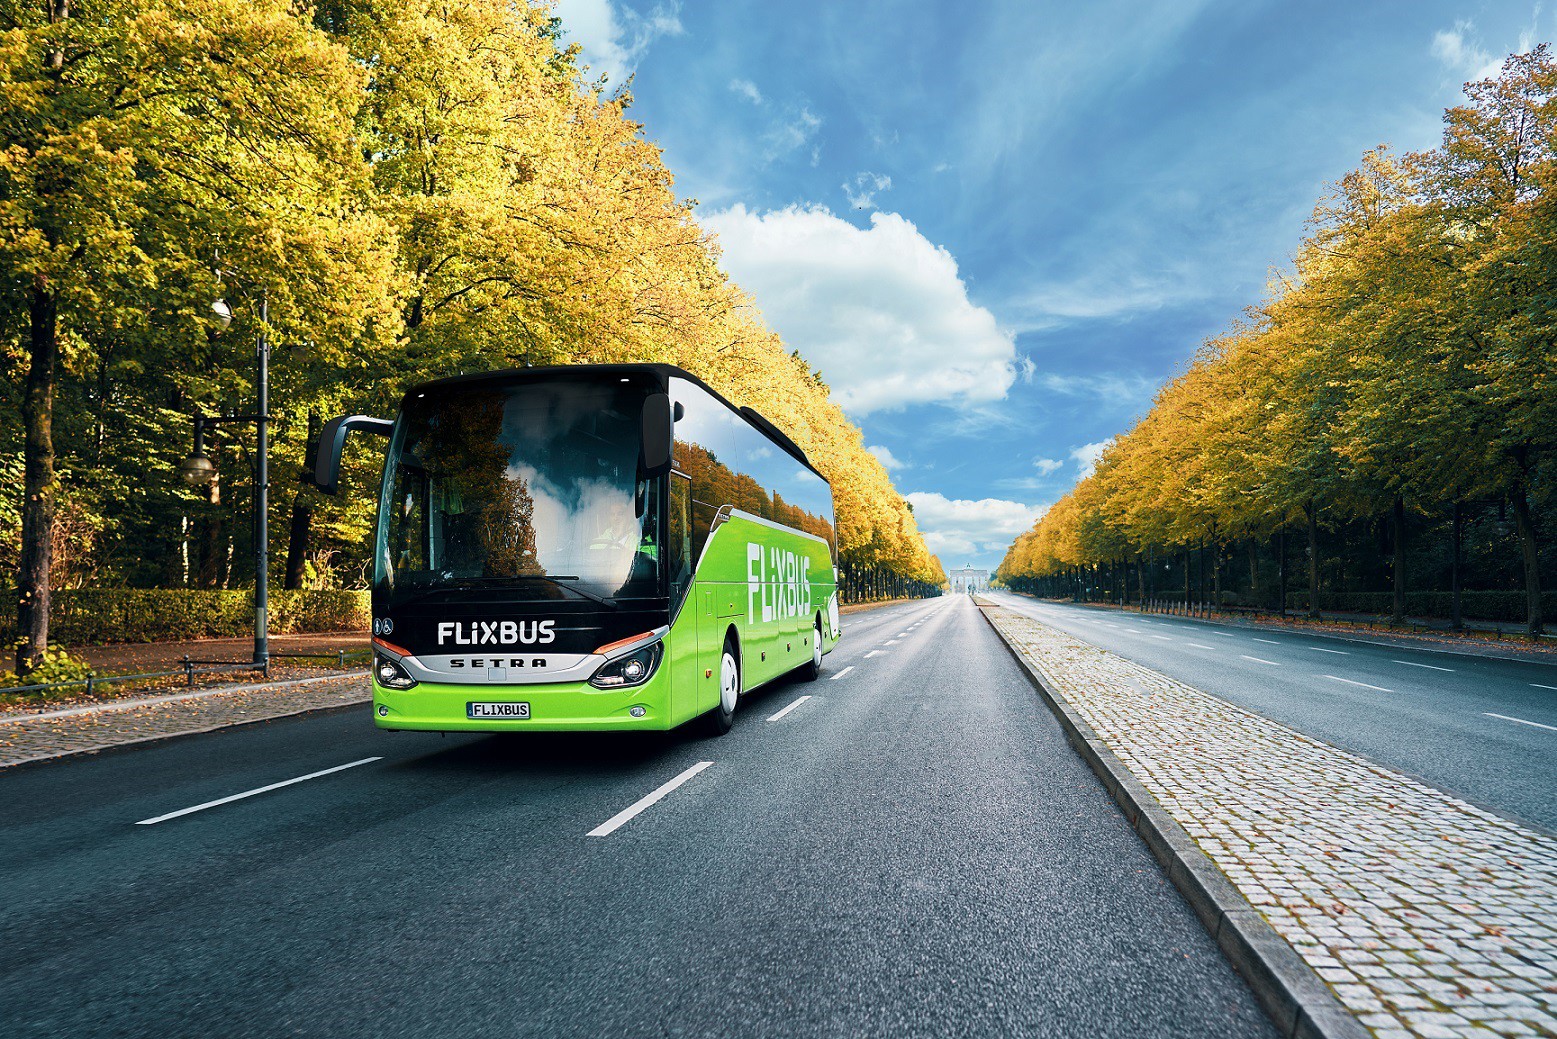 FlixBus carried 1.7 million passengers on the peninsula as of September, more than double what it was in 2019